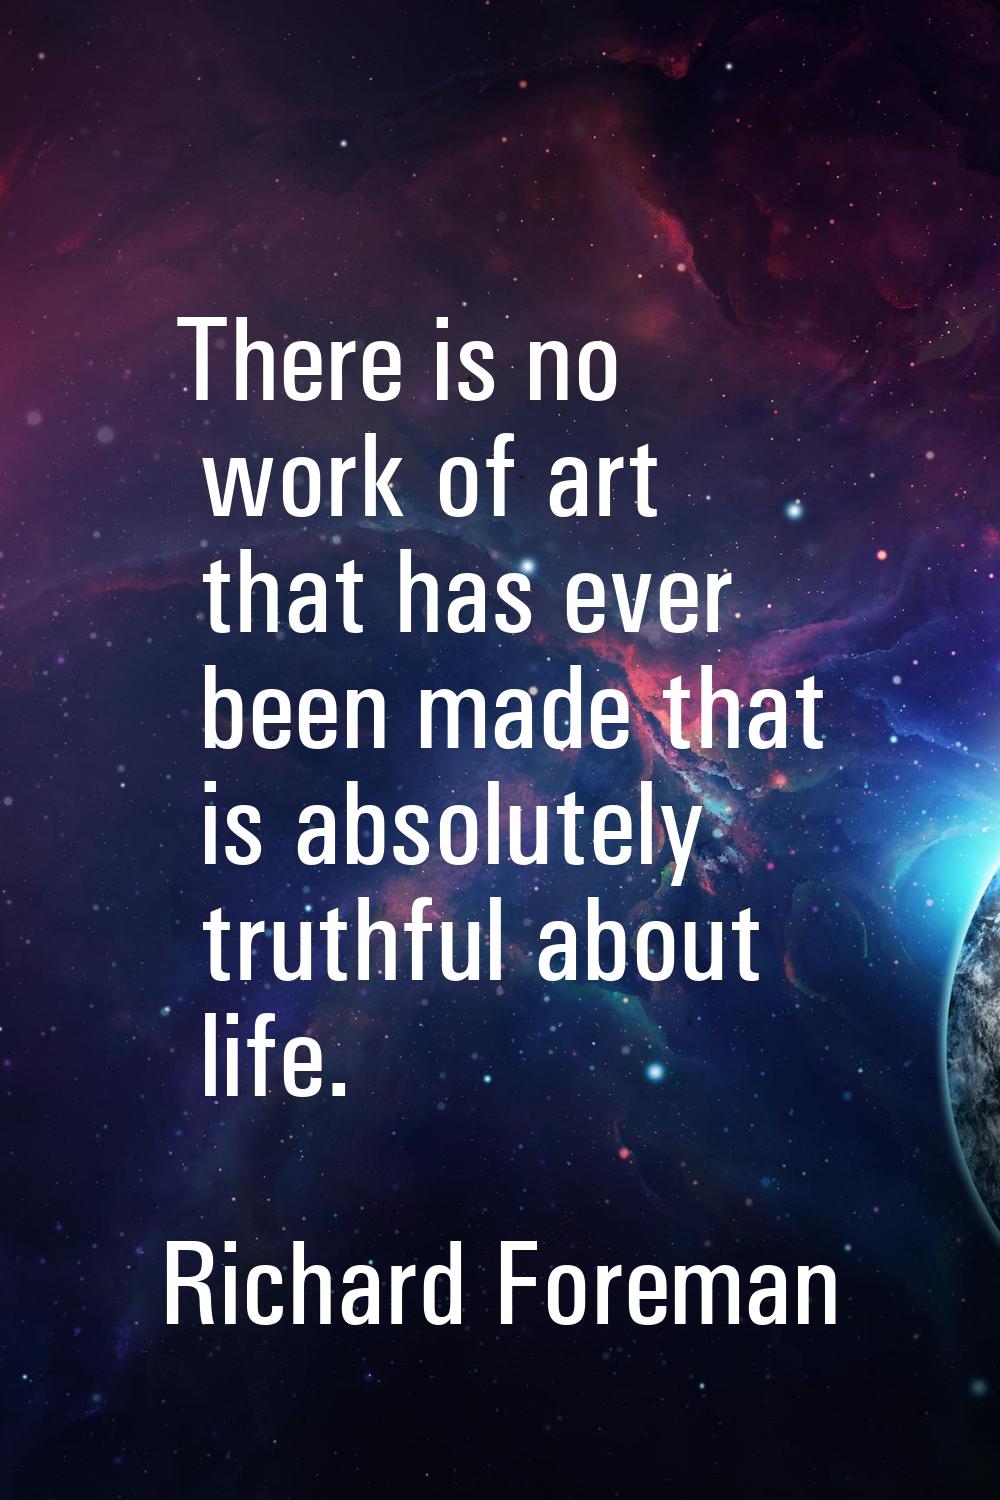 There is no work of art that has ever been made that is absolutely truthful about life.